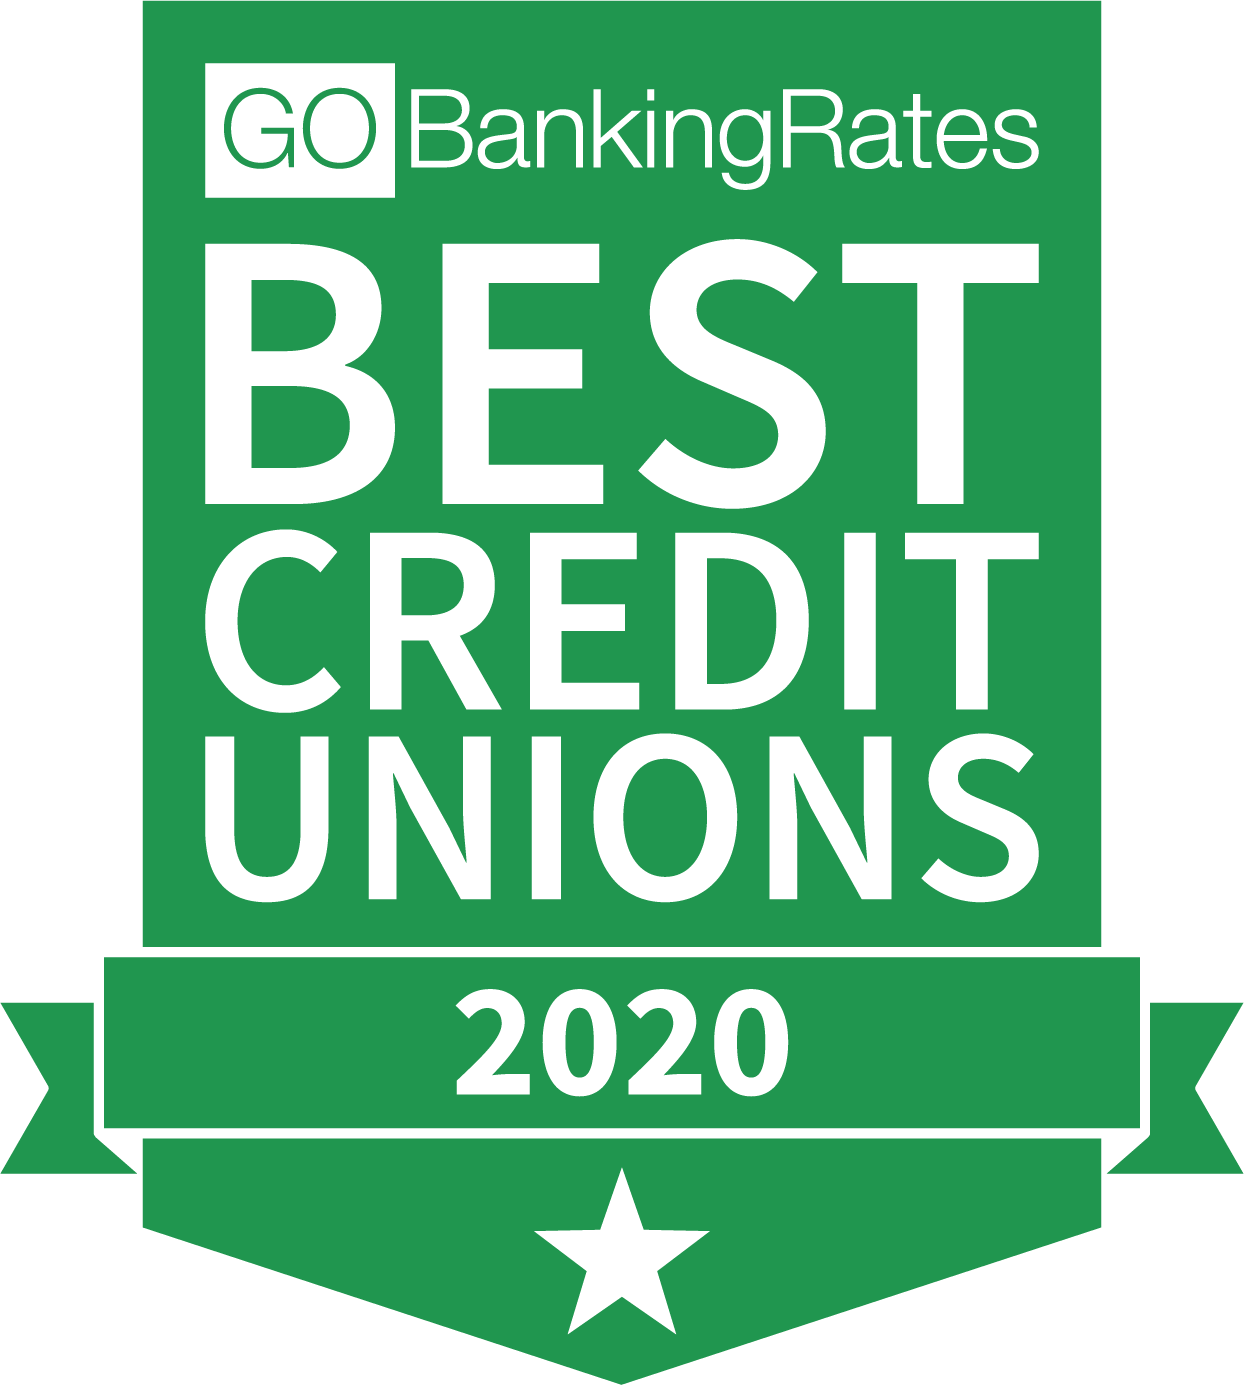 PSECU was named a Best Credit Union of 2020 by GOBankingRates.